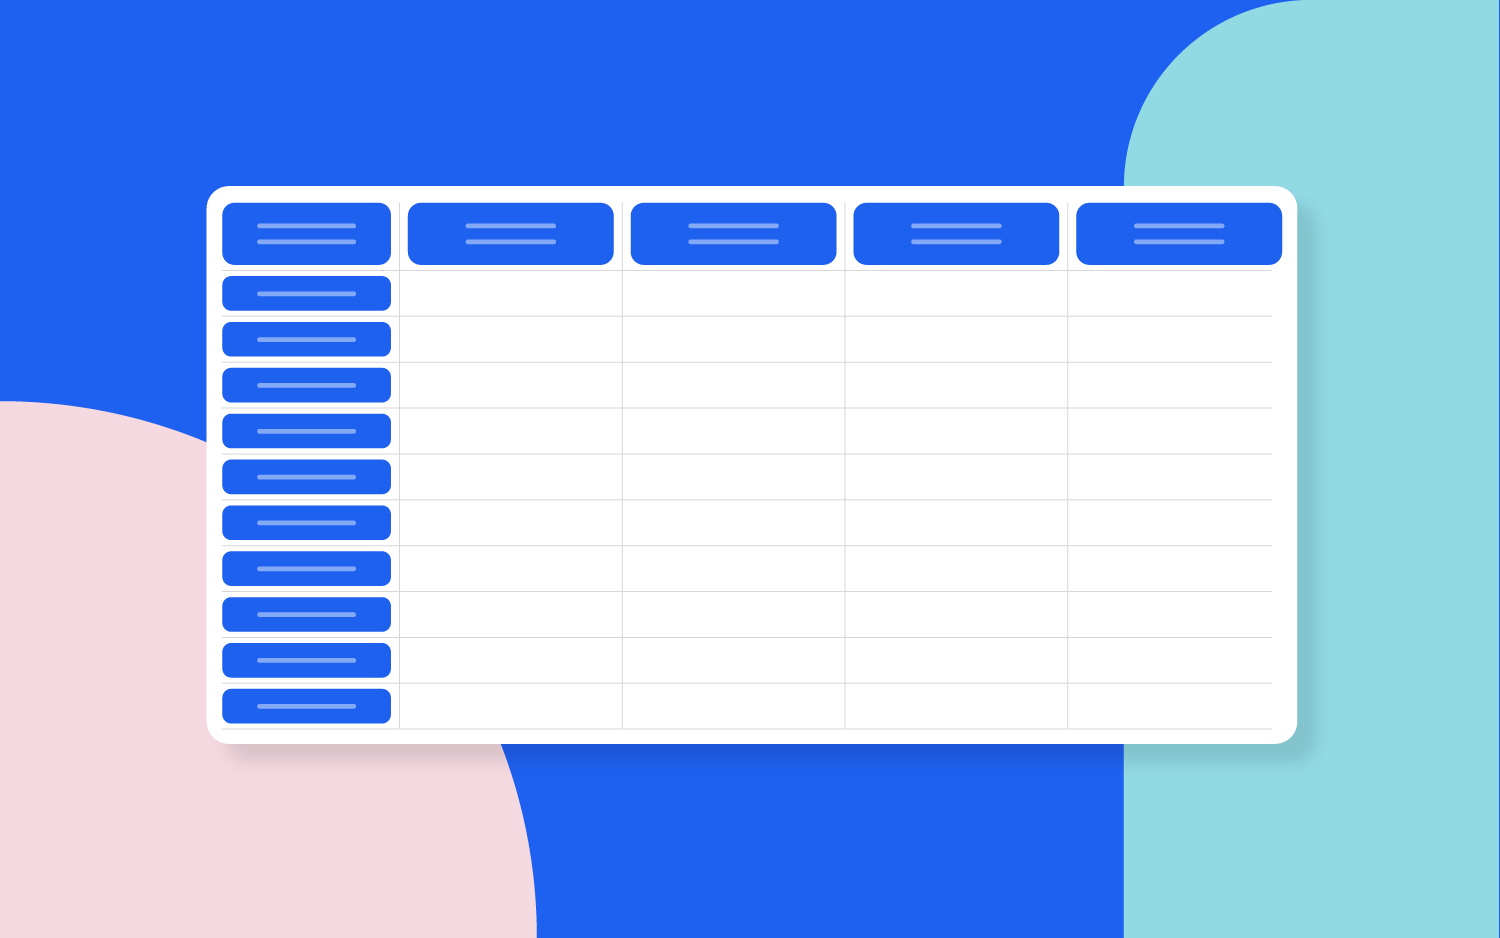 colorful representation of a spreadsheet